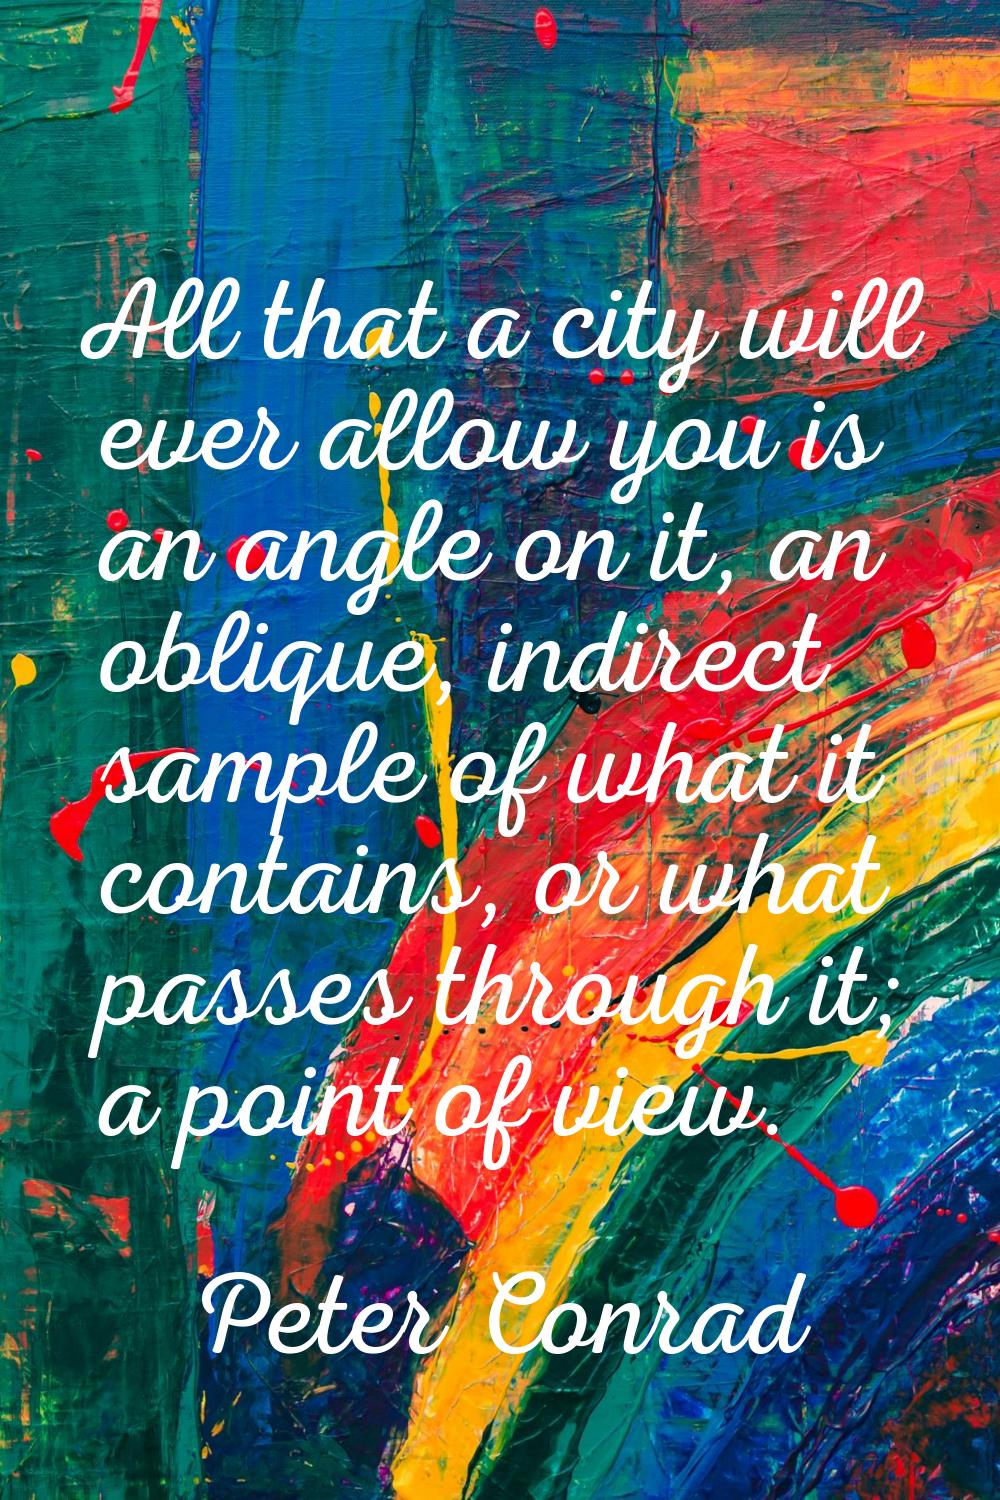 All that a city will ever allow you is an angle on it, an oblique, indirect sample of what it conta